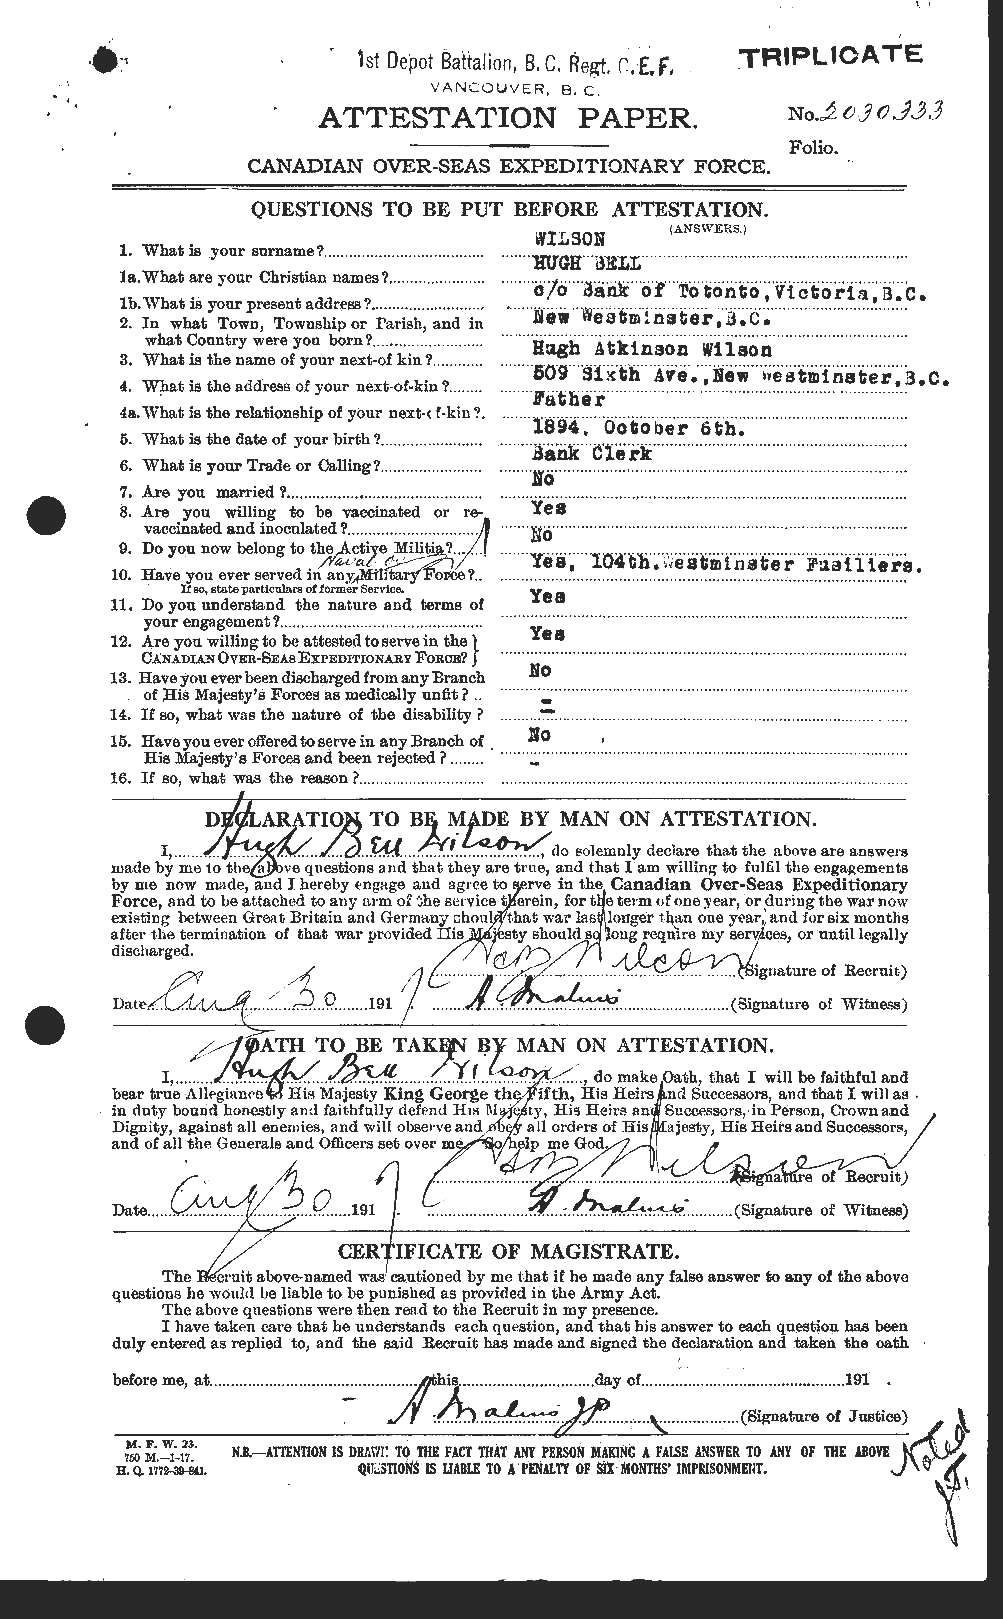 Personnel Records of the First World War - CEF 679608a